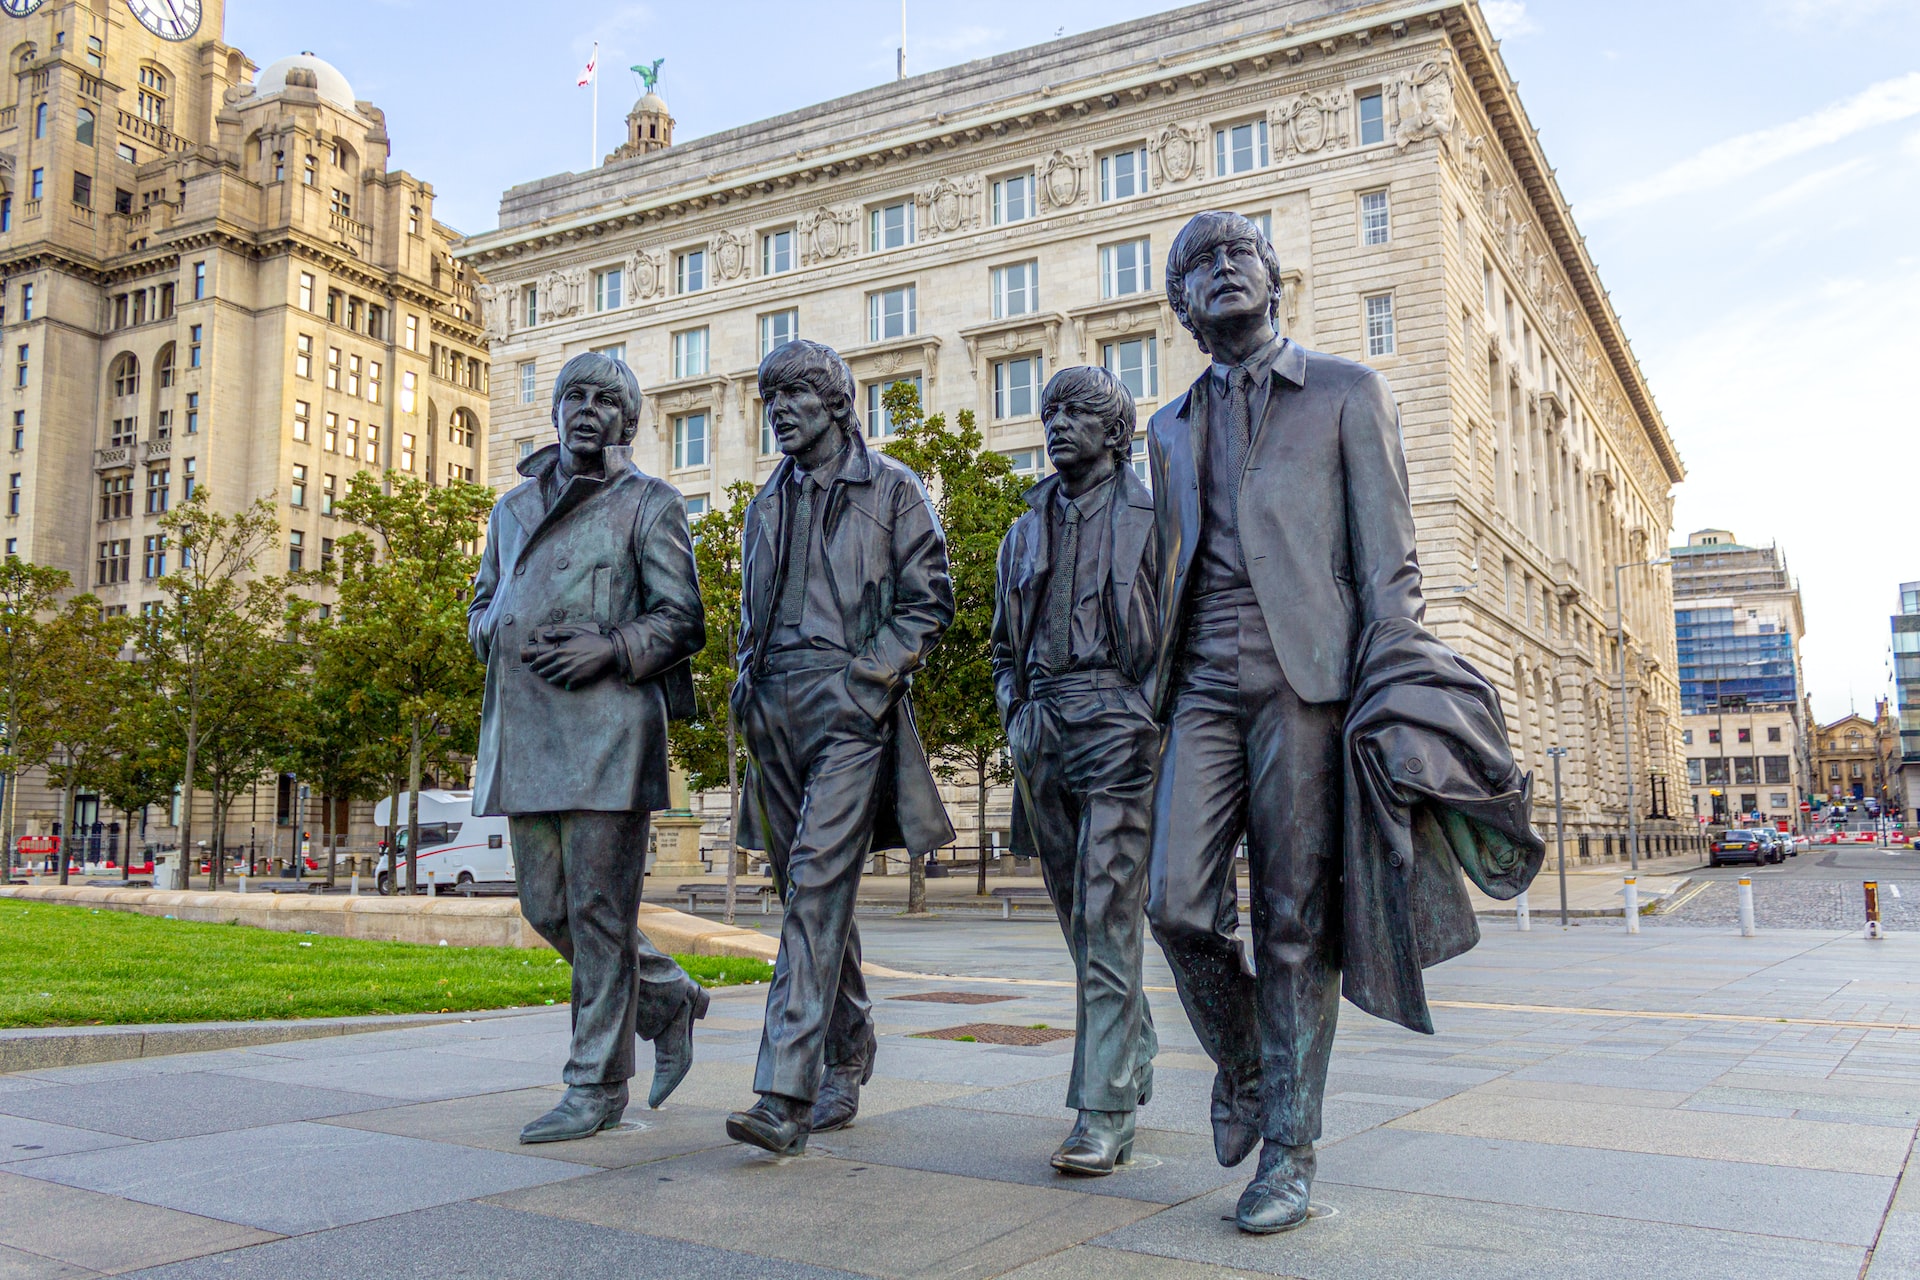 A statue of the Beatles strolling down a lane in Liverpool.